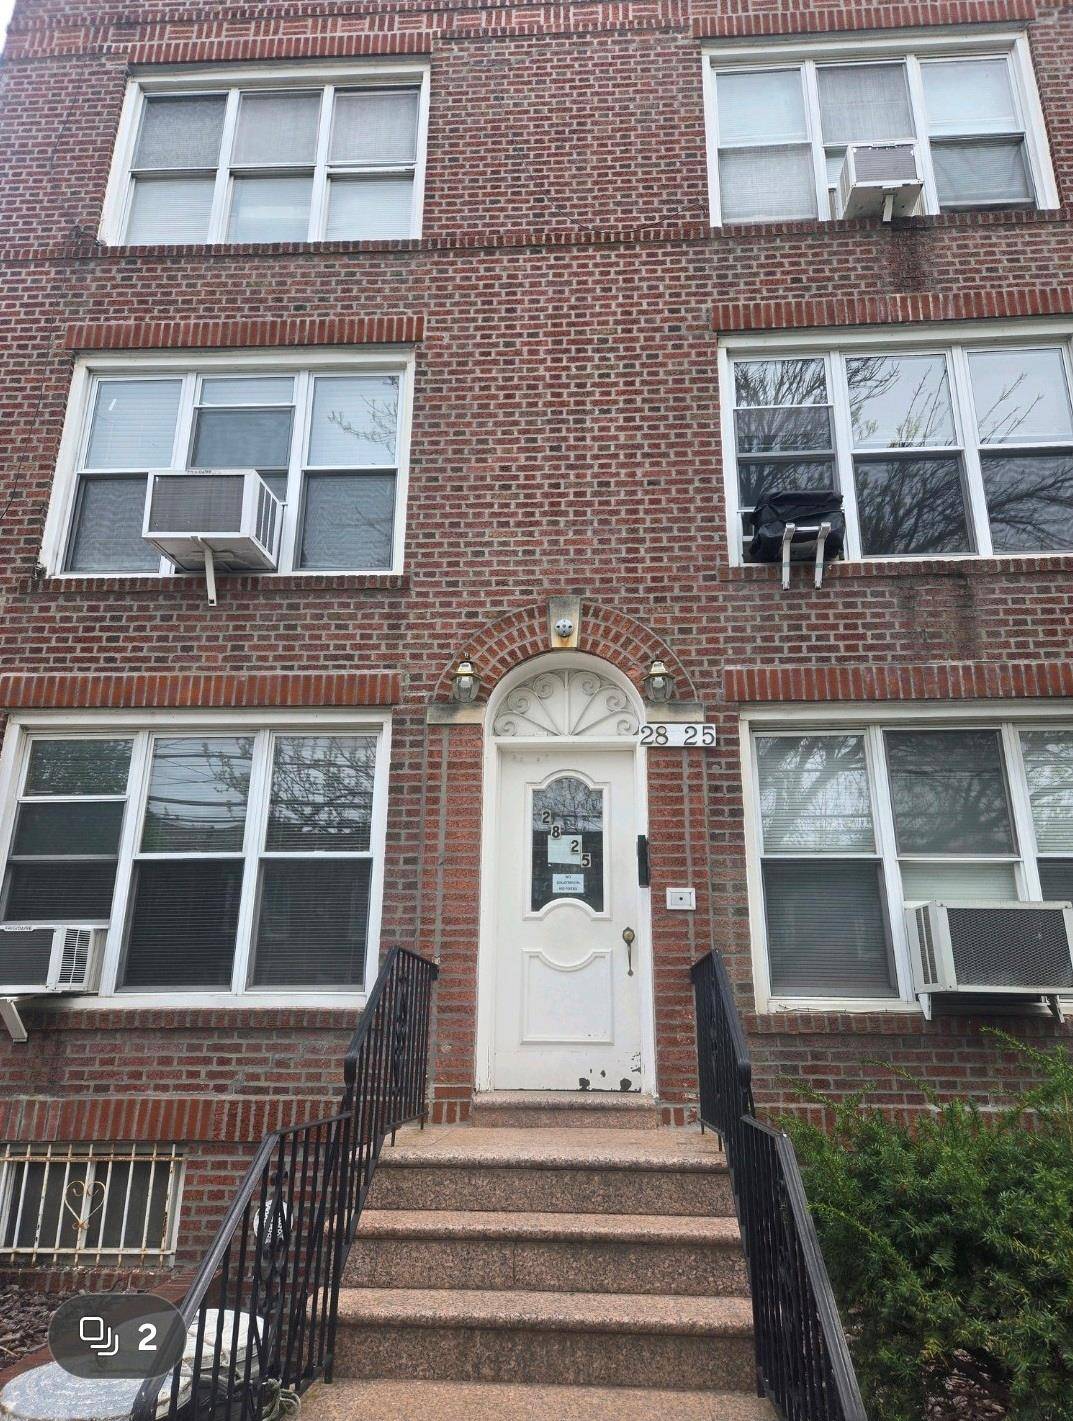 For Sale Immaculate Multi Family Brick Building in Prime Desirable Astoria LocationNestled in the heart of Astoria, Queens, NY, this exceptional multi family brick building presents a lucrative investment opportunity.